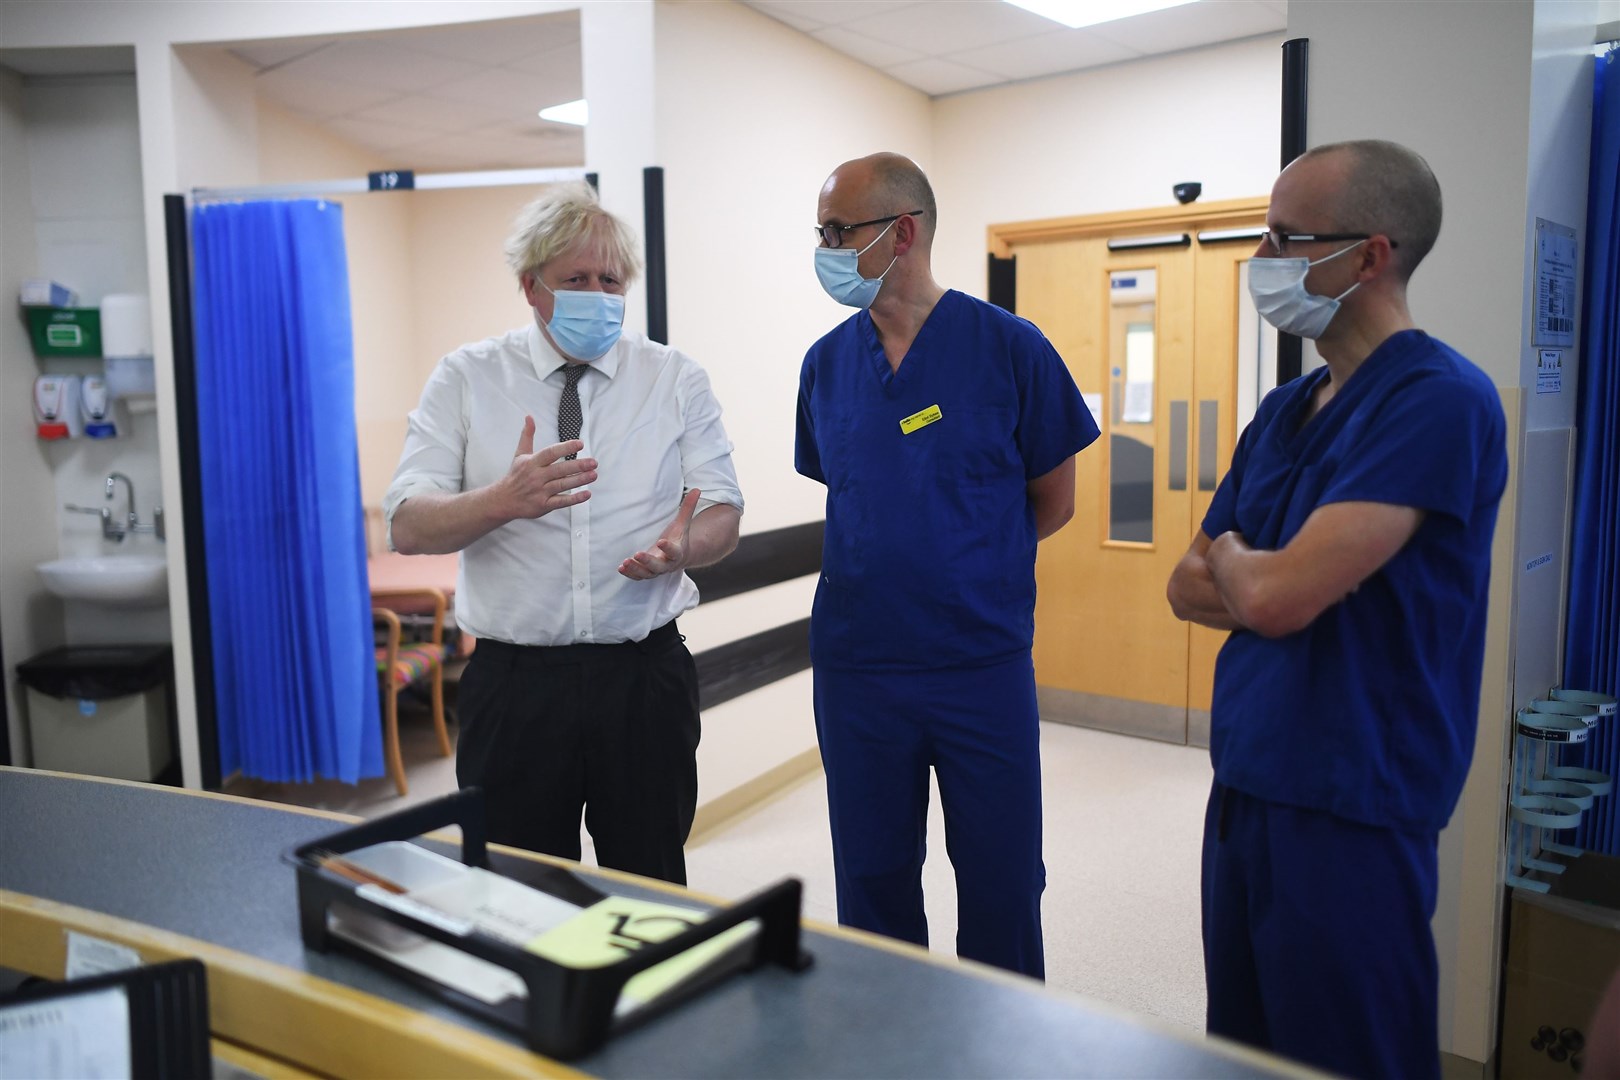 Boris Johnson during a visit to Hexham General Hospital in Northumberland (Peter Summers/PA)